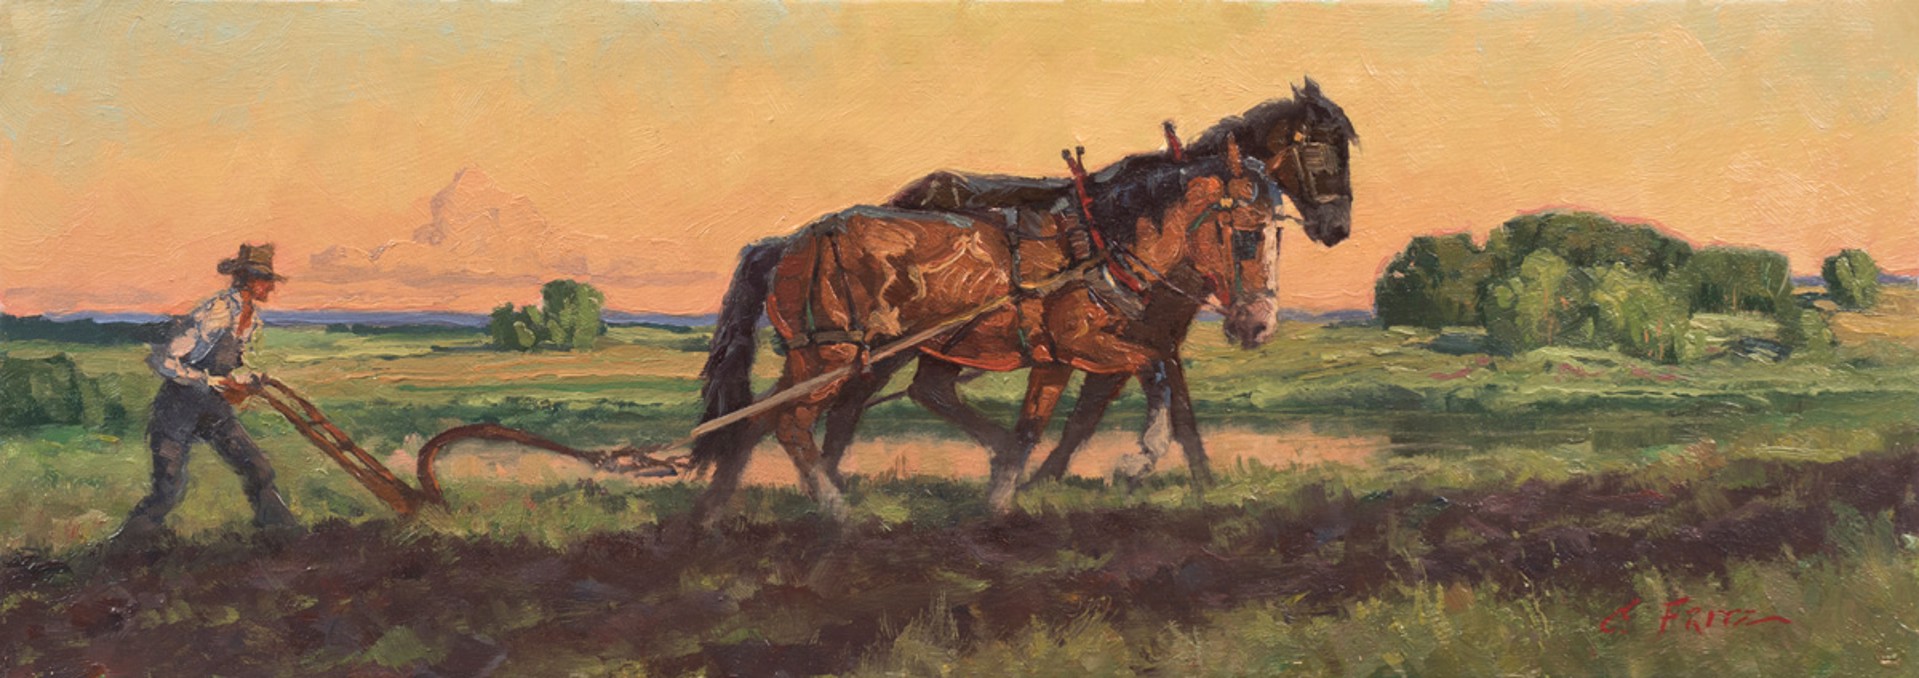 The Homesteader’s Team by Charles Fritz